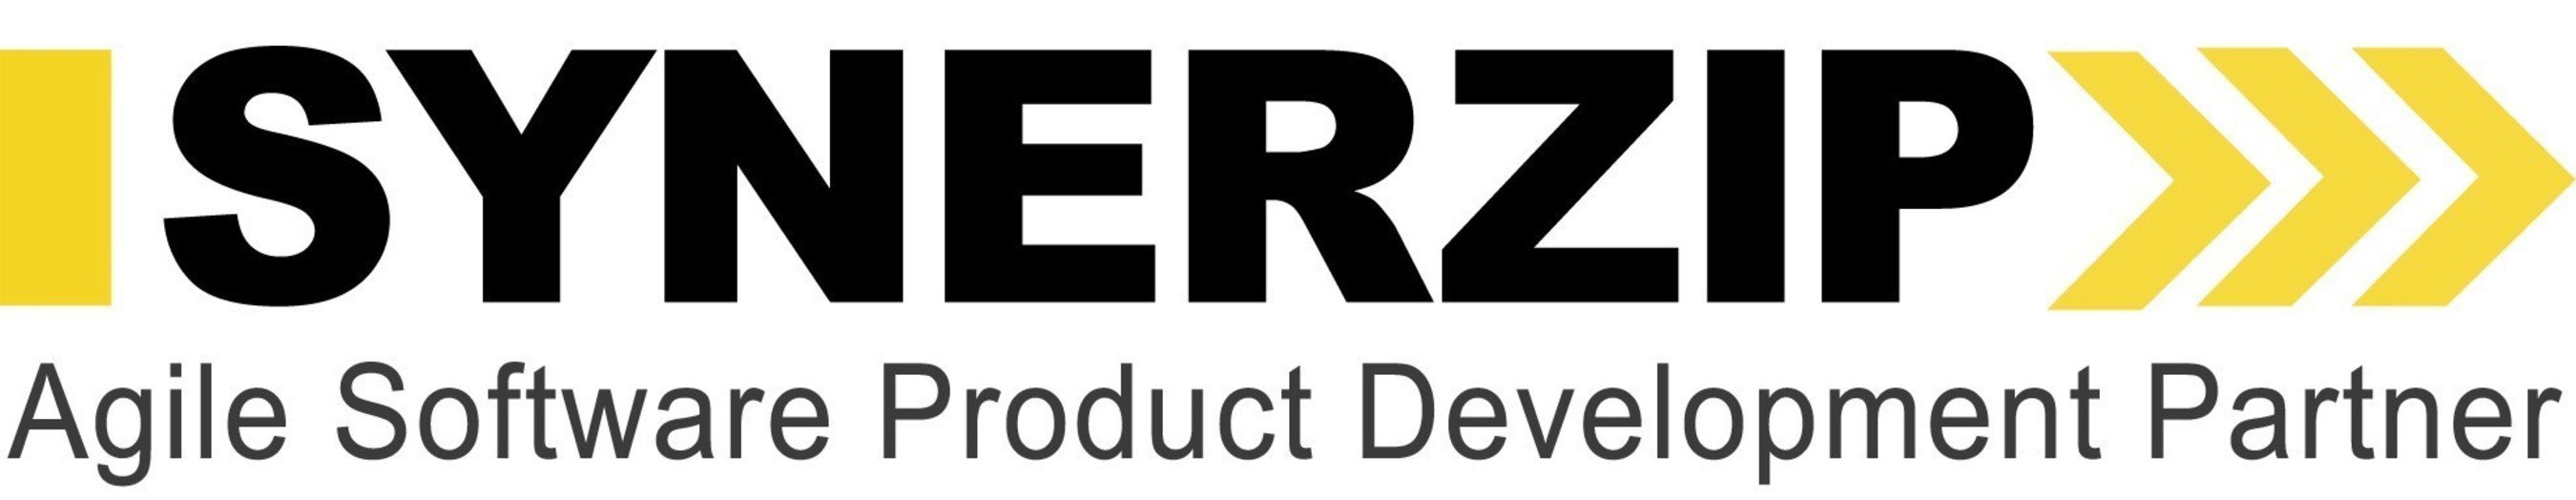 Synerzip is your trusted outsourcing partner for Agile software product development. Accelerate your product roadmap. Address technology skill gaps.